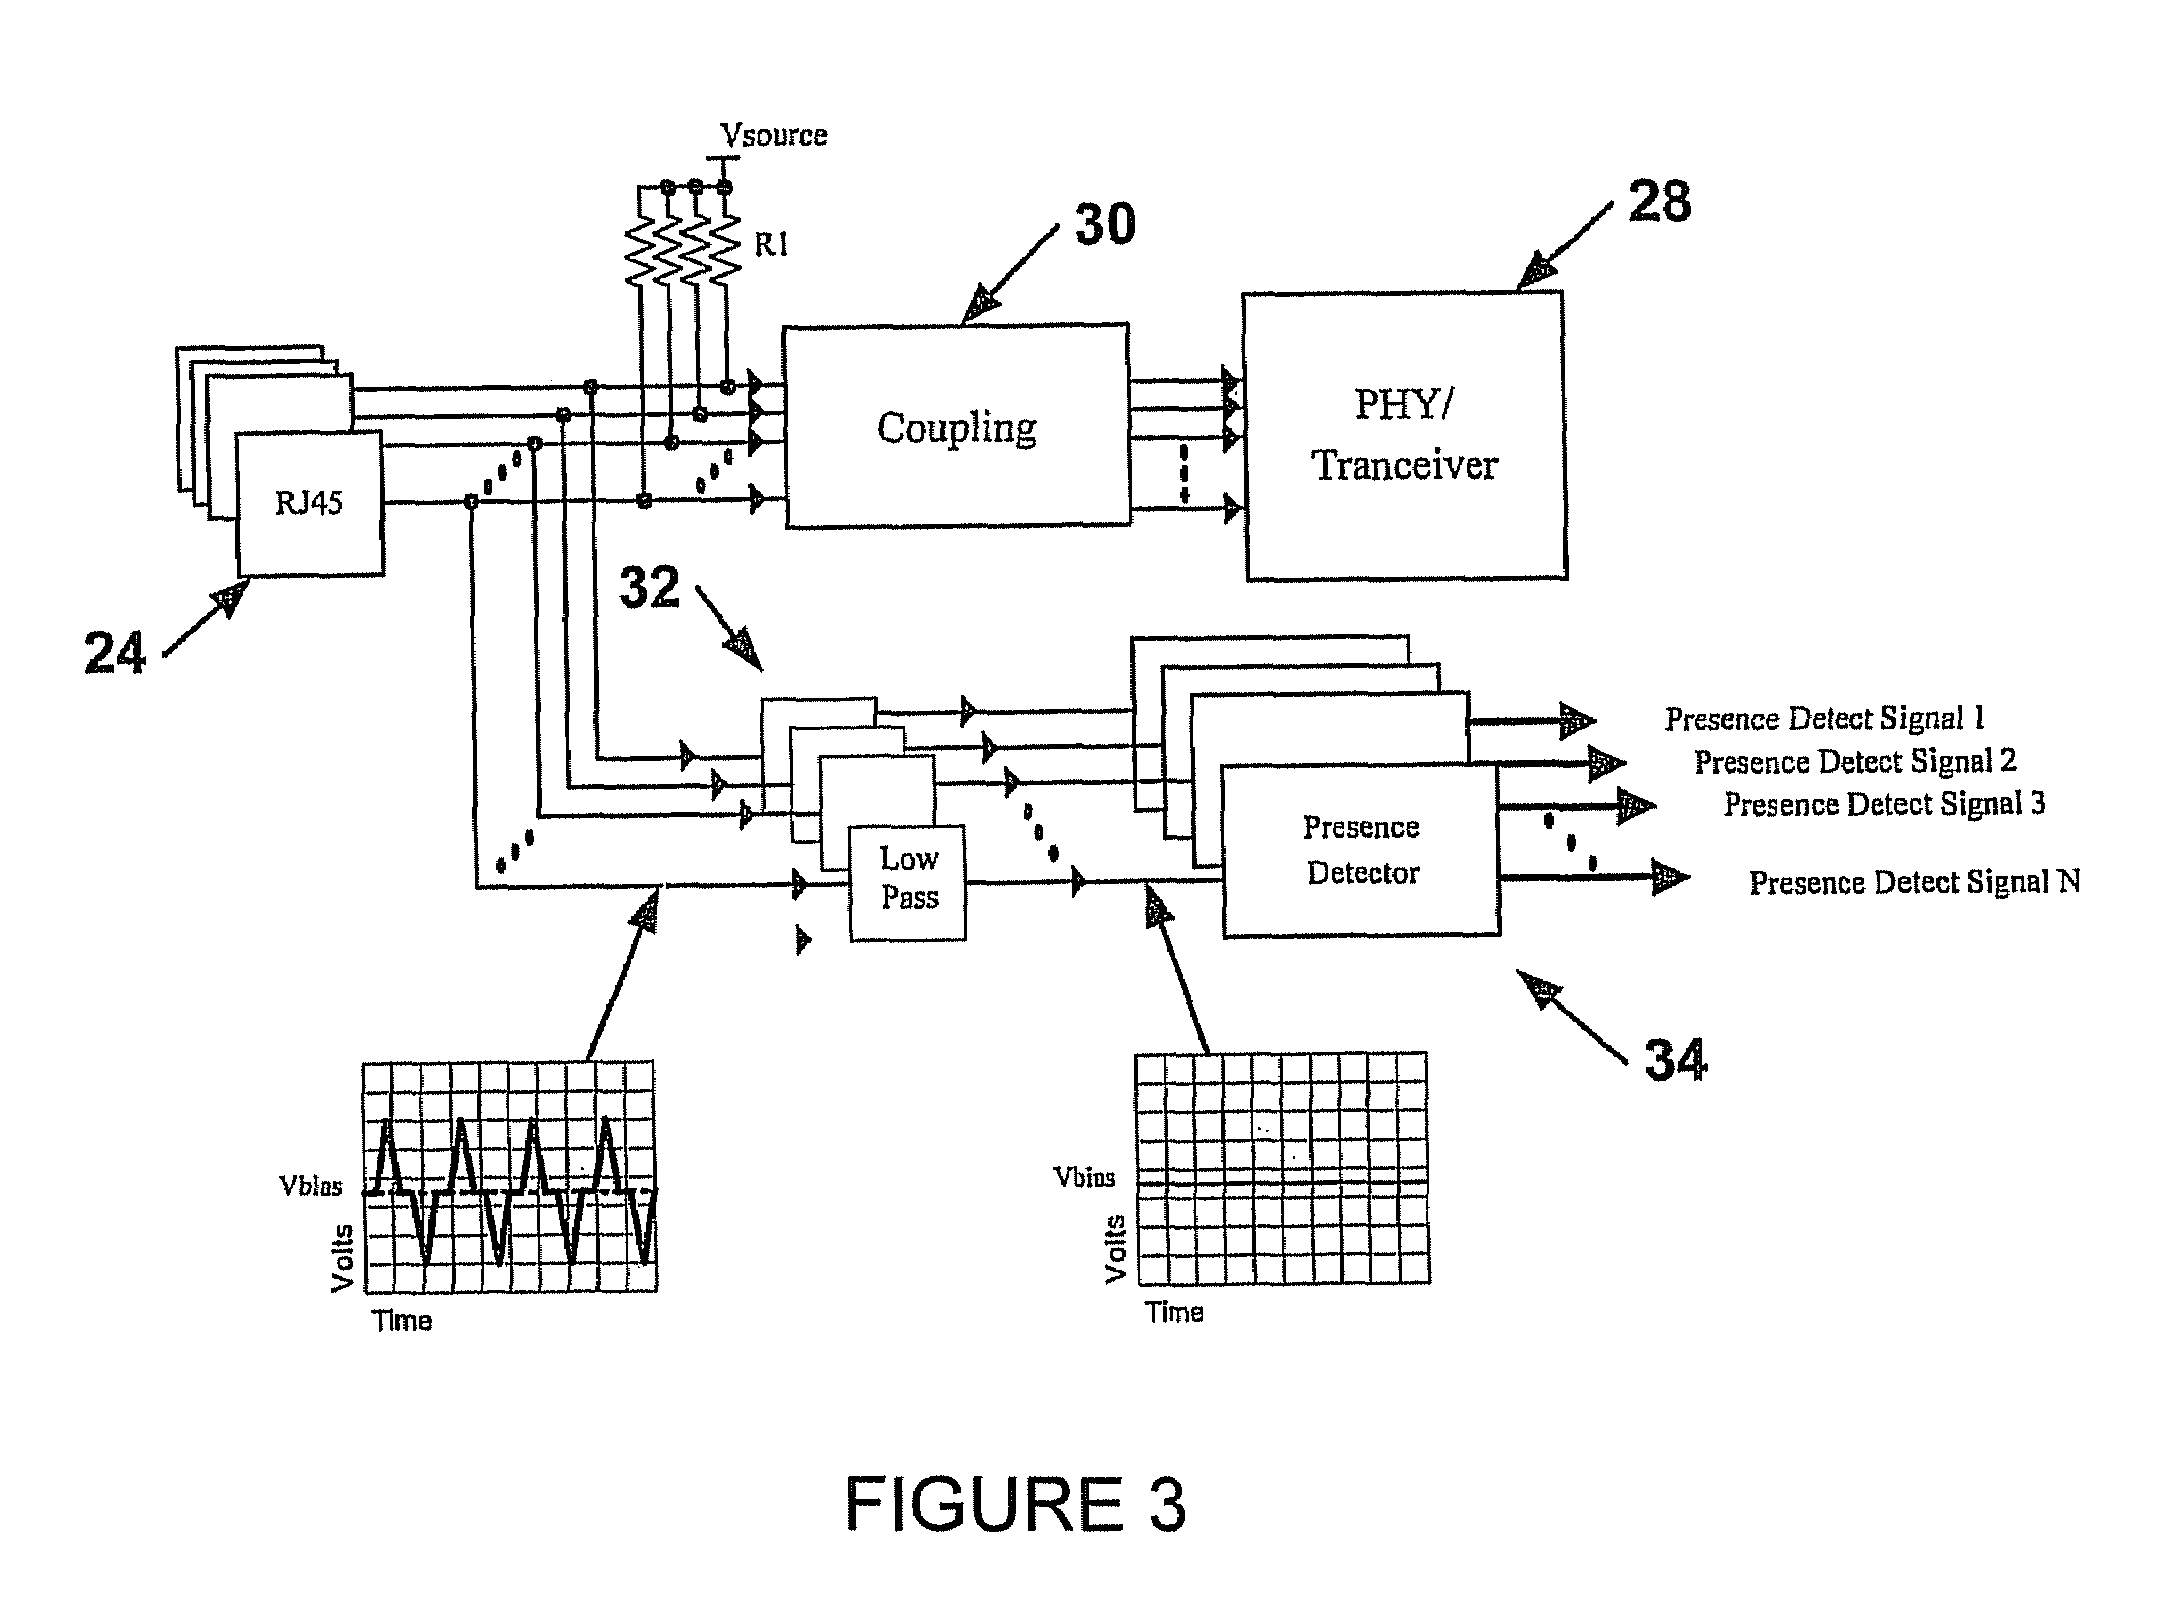 Network management system providing logic signals over communication lines for detecting peripheral devices